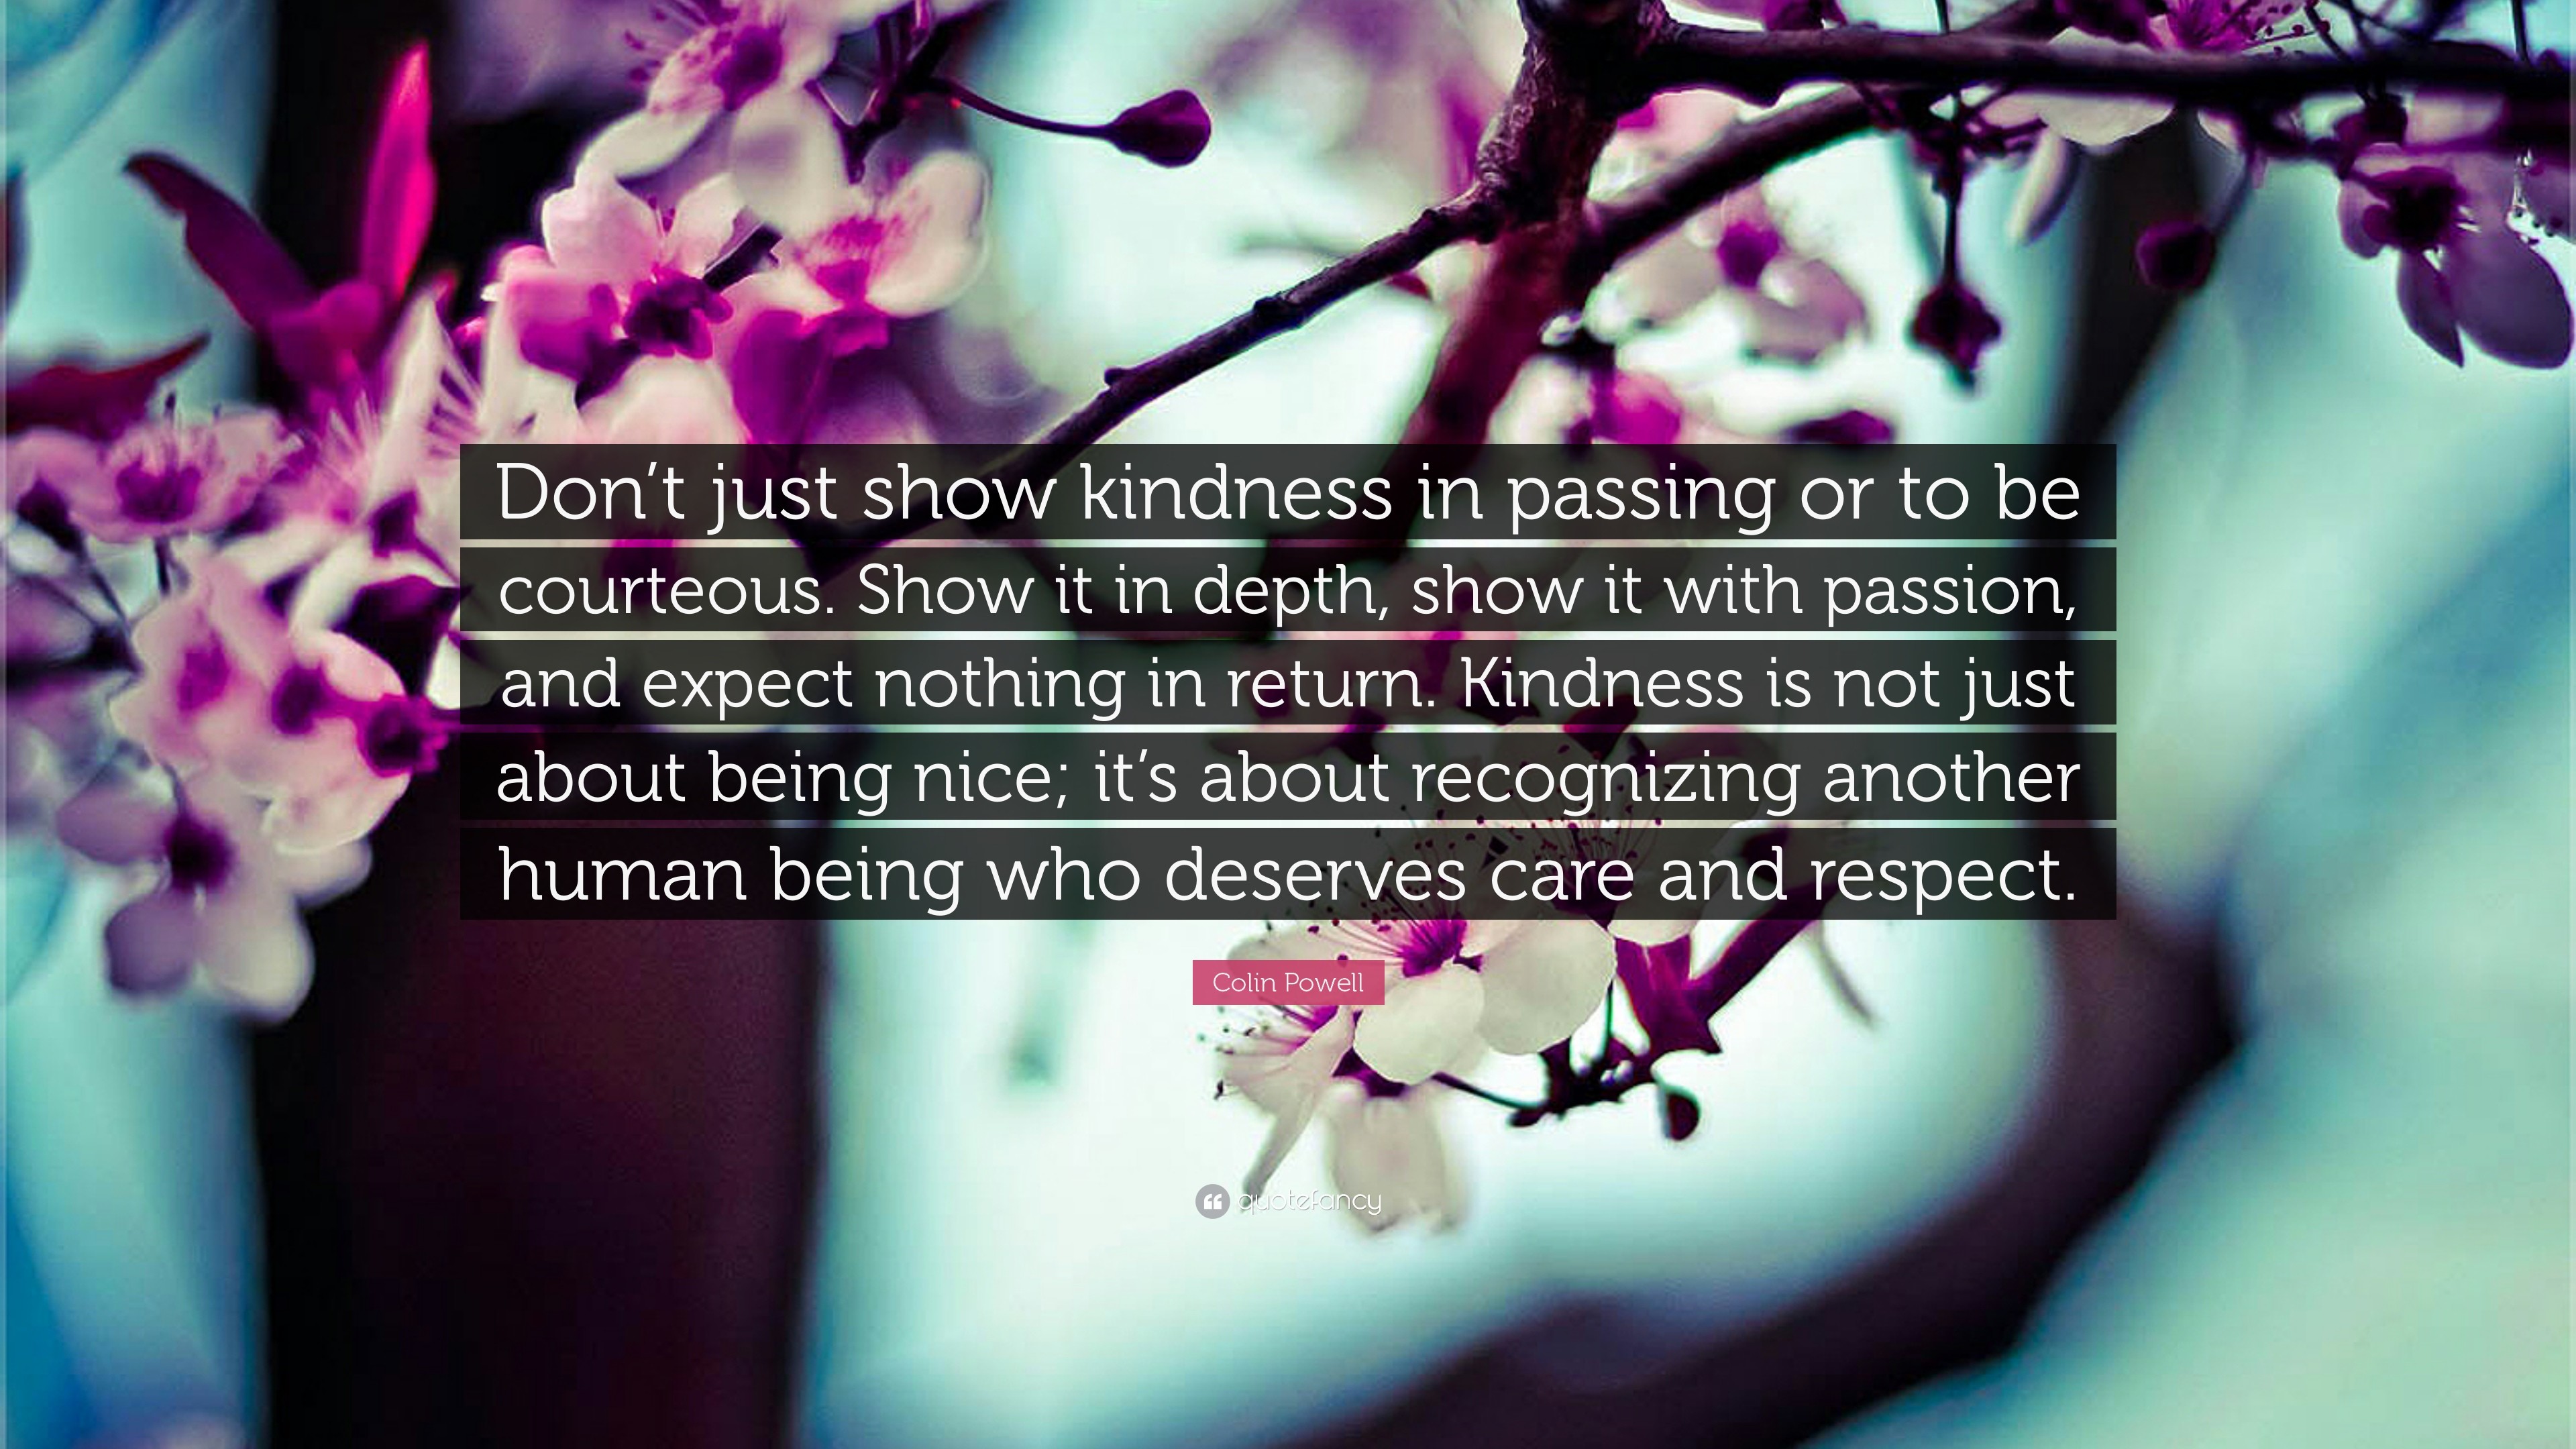 3840x2160 Kindness Quotes: “Don't just show kindness in passing or to be courteous